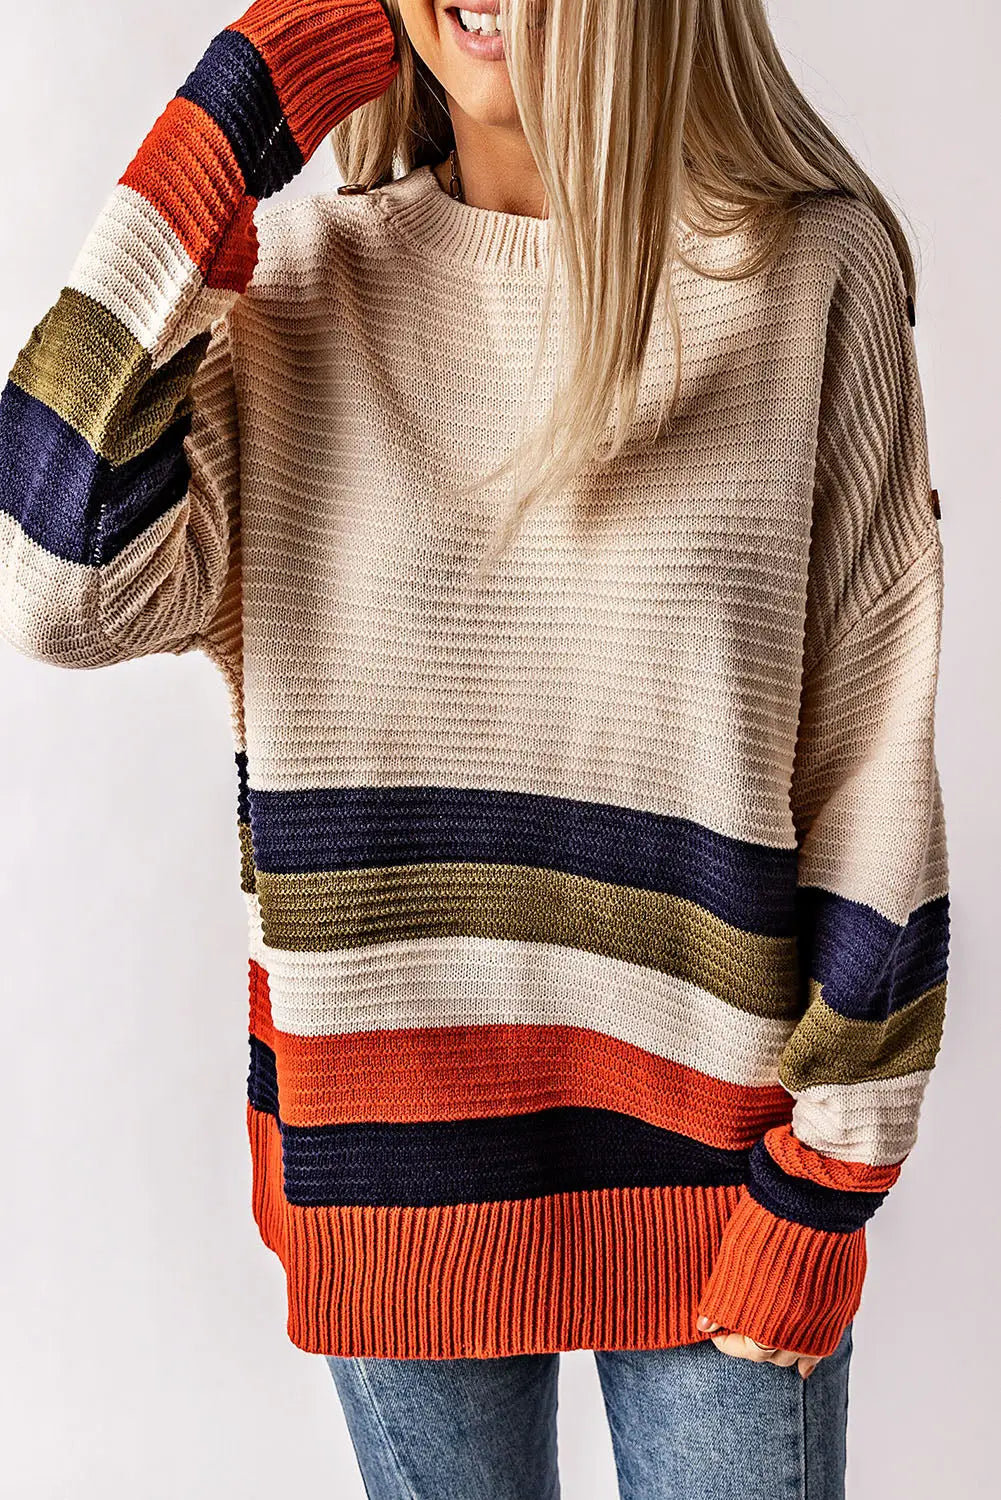 White buttoned shoulder drop striped sweater - s / 100% acrylic - sweaters & cardigans